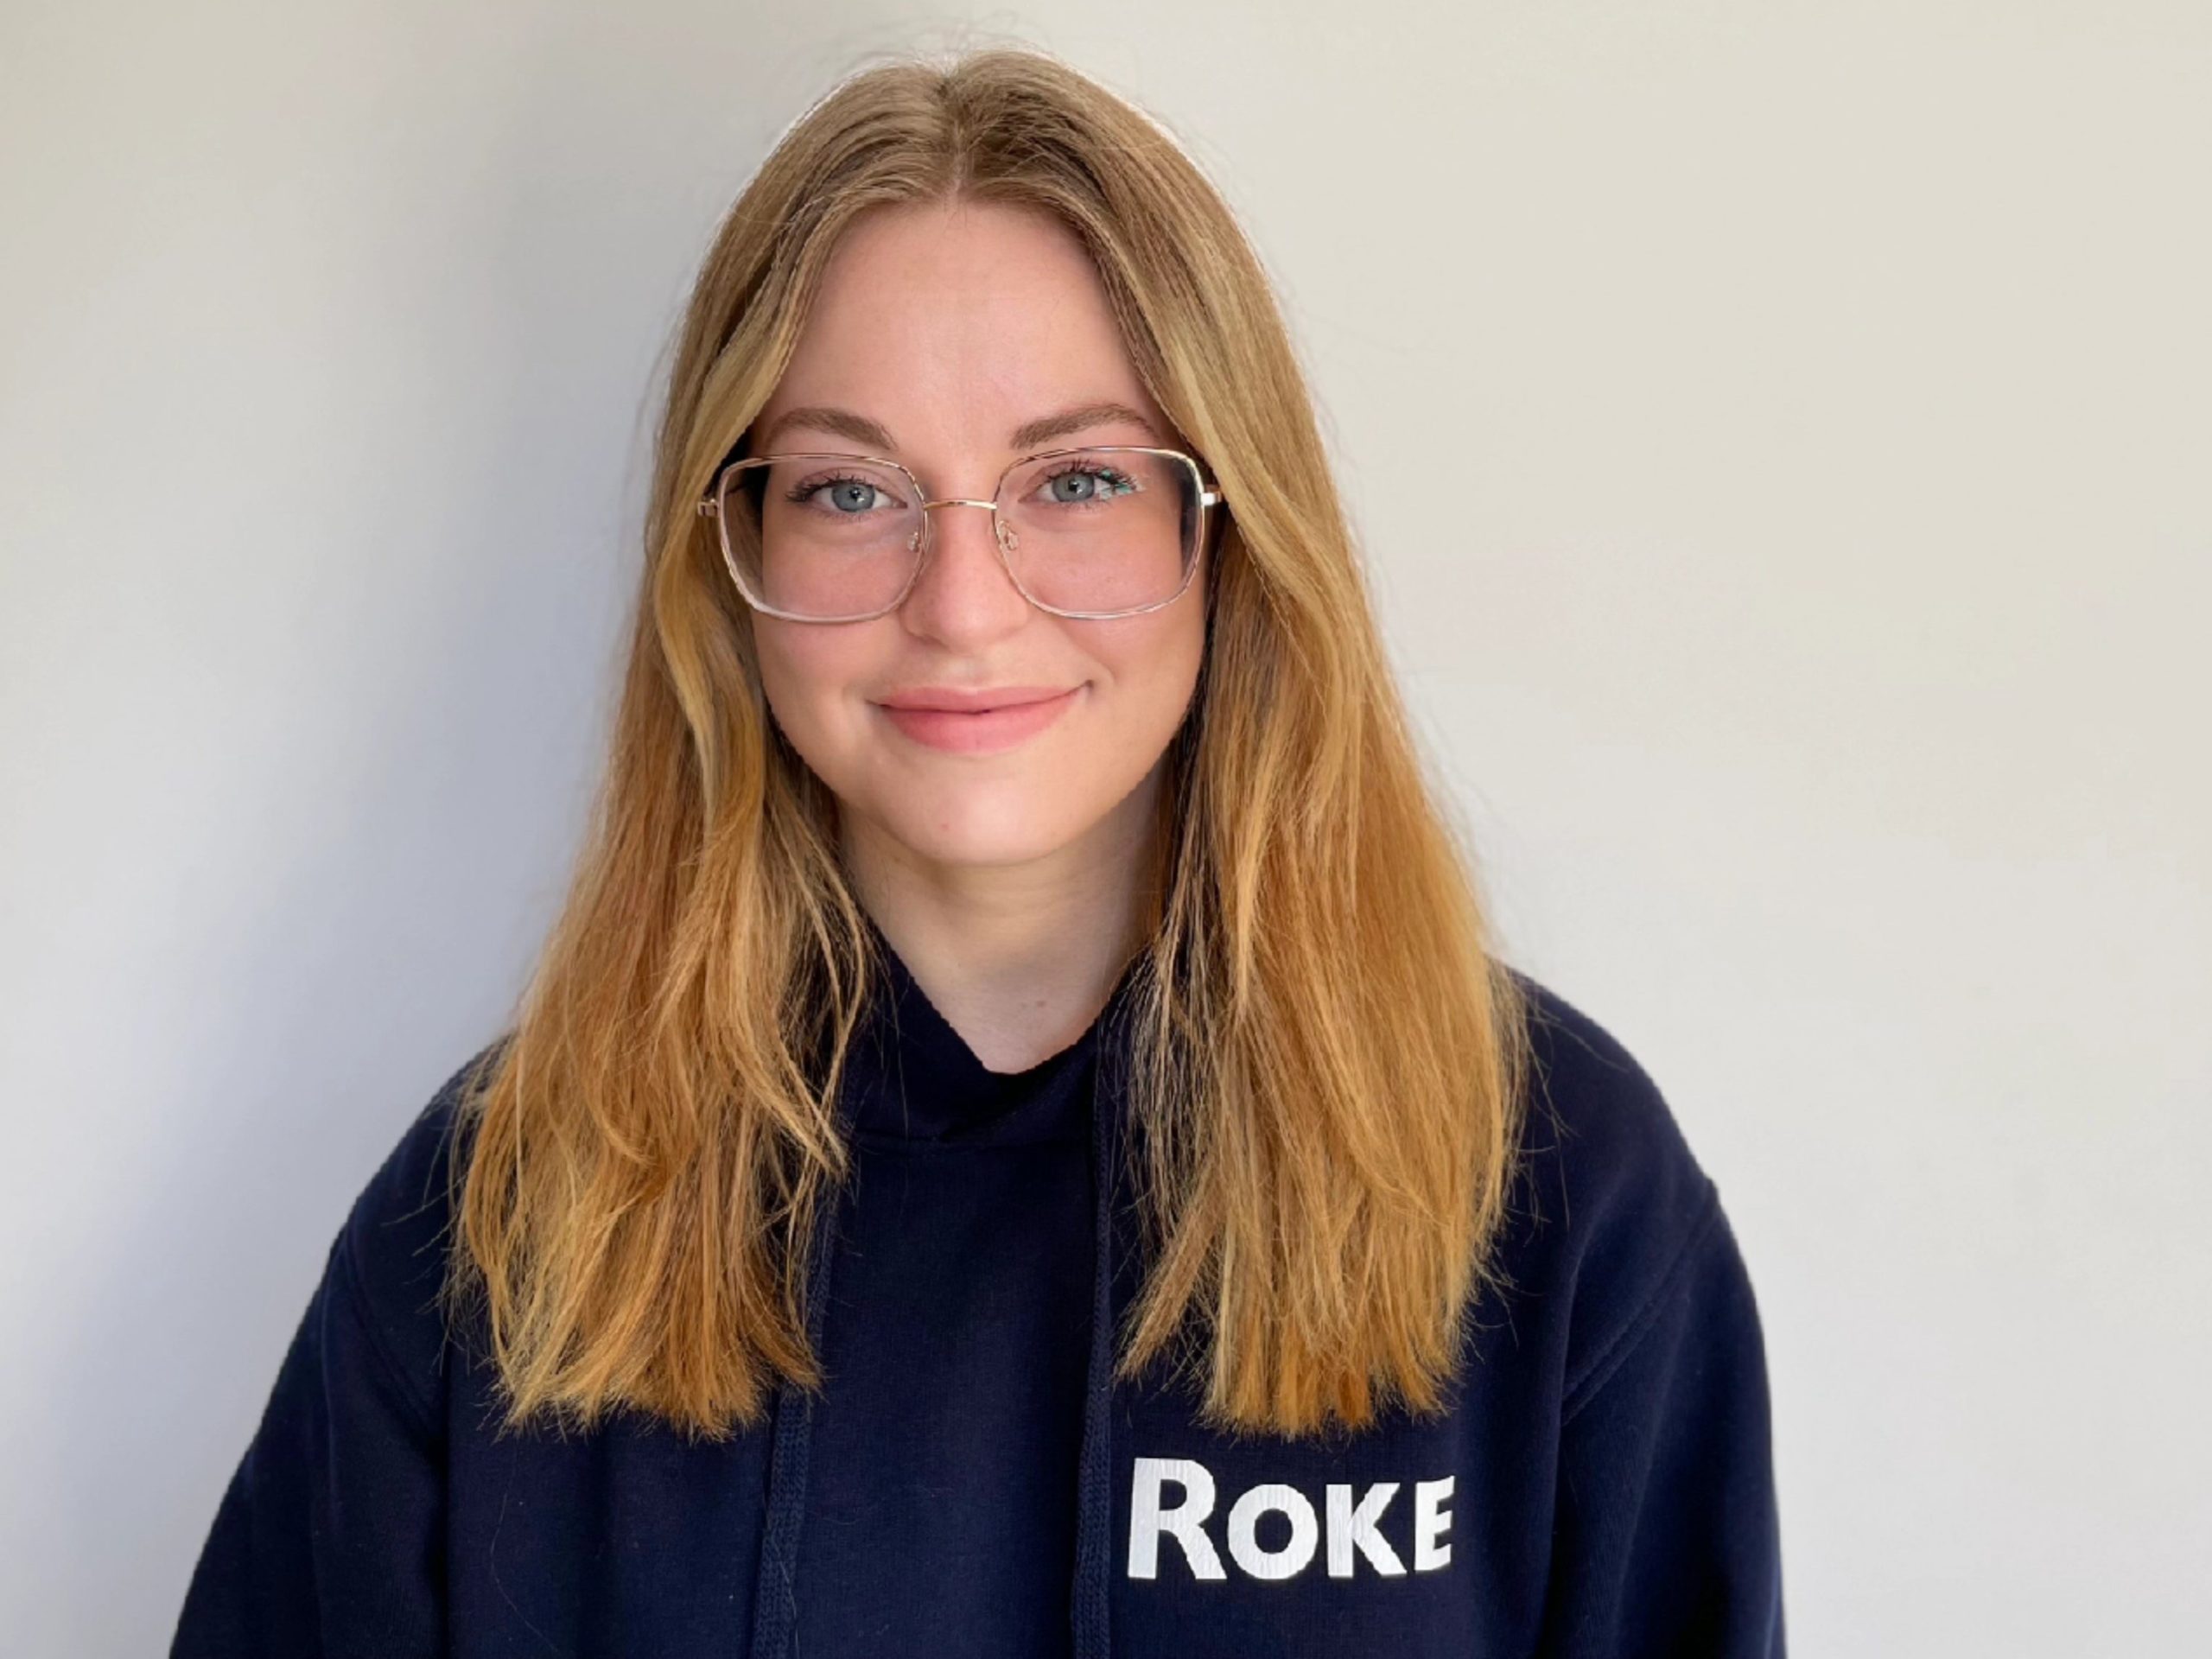 Photograph of Colette in her Roke work hoodie